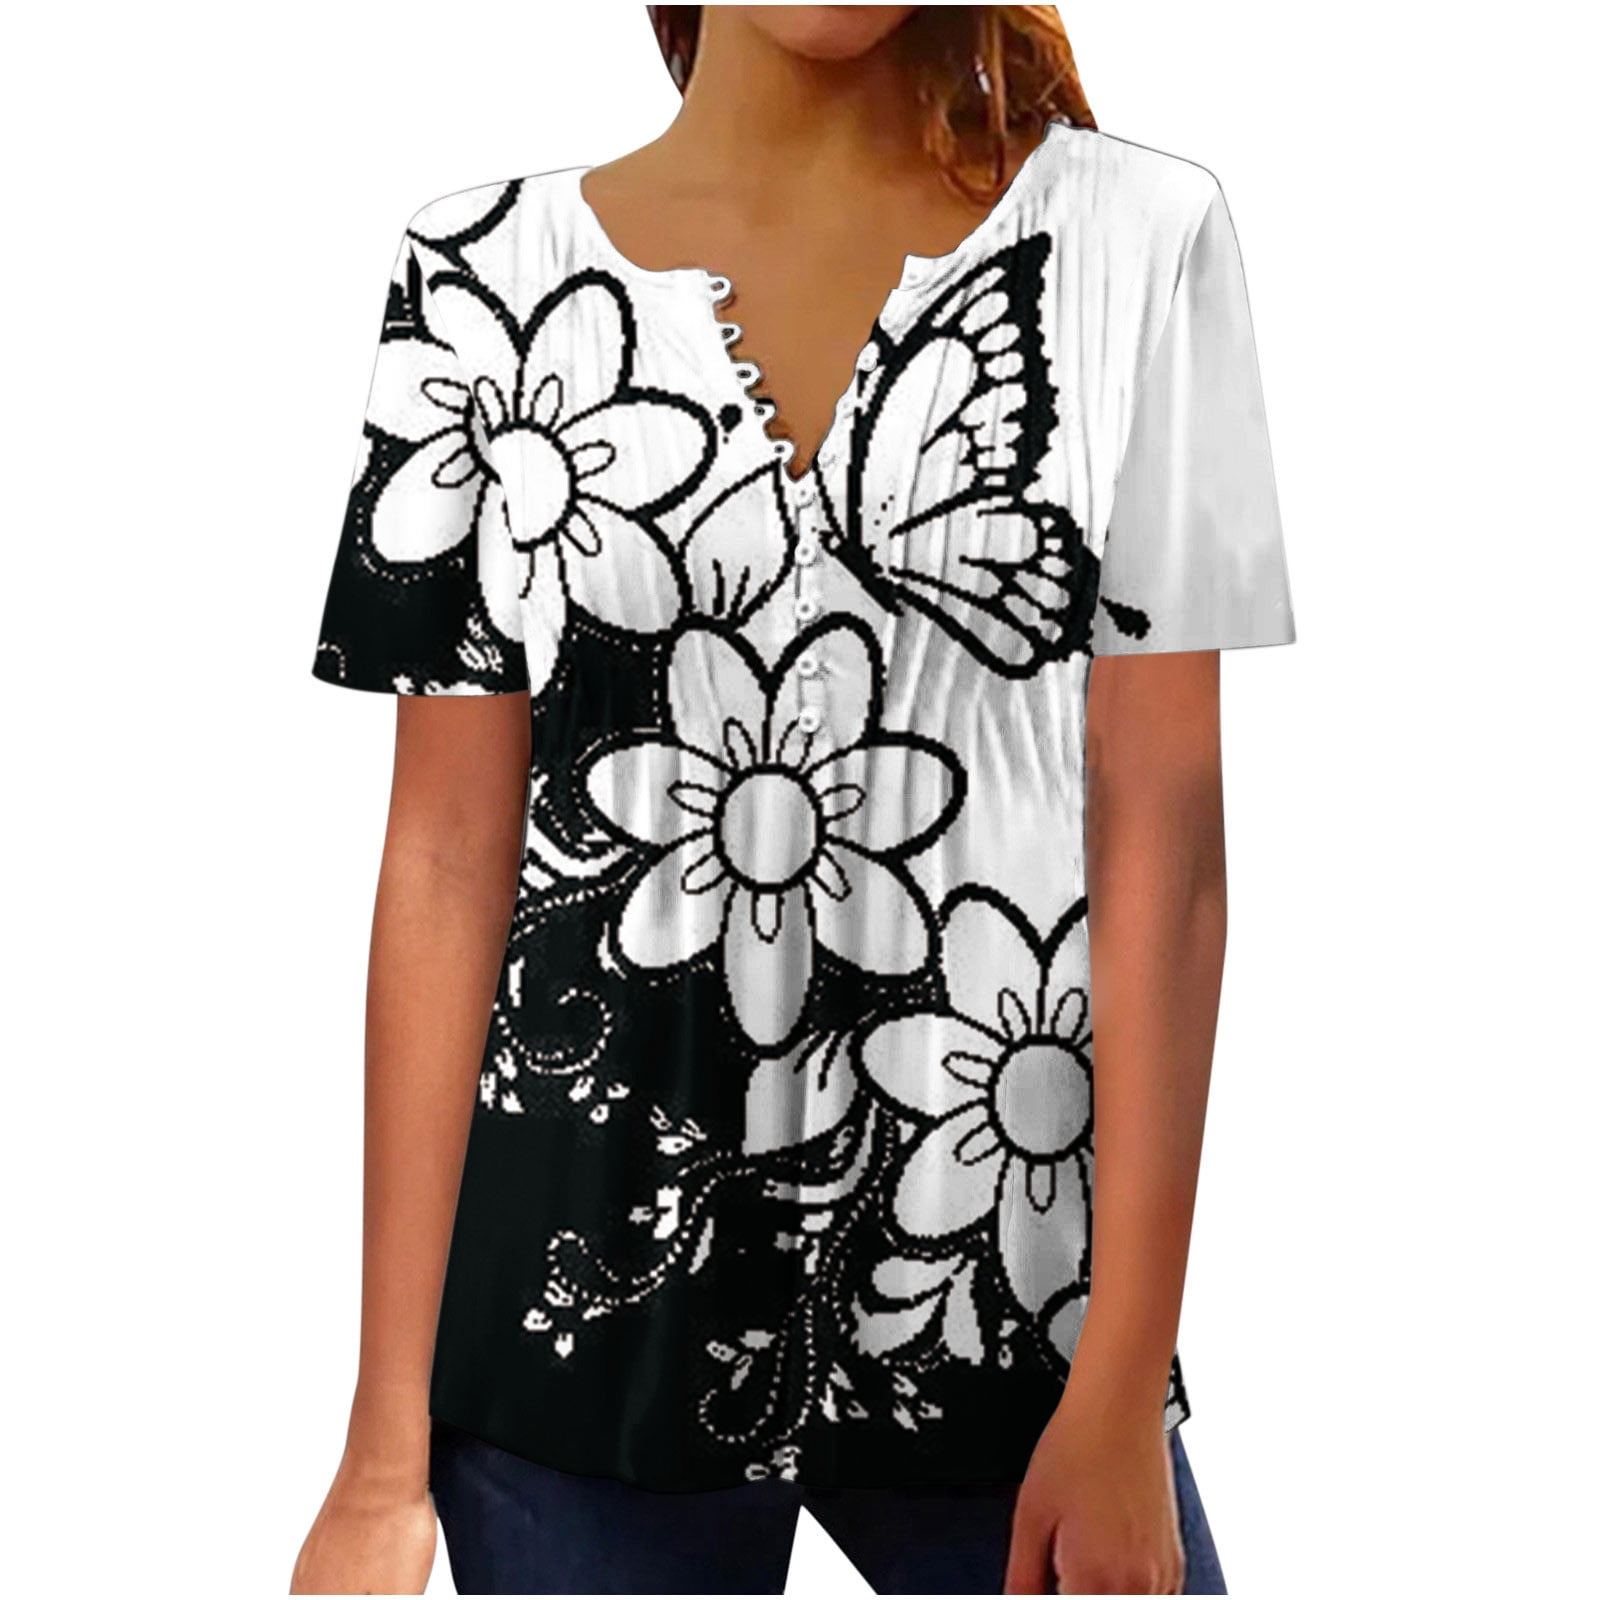 DDAPJ pyju Womens Tops Hide Belly Fat Shirts,Summer Pleated Button V Neck  T-Shirt Causal Empire Waist A-Line Floral Tunic Tops